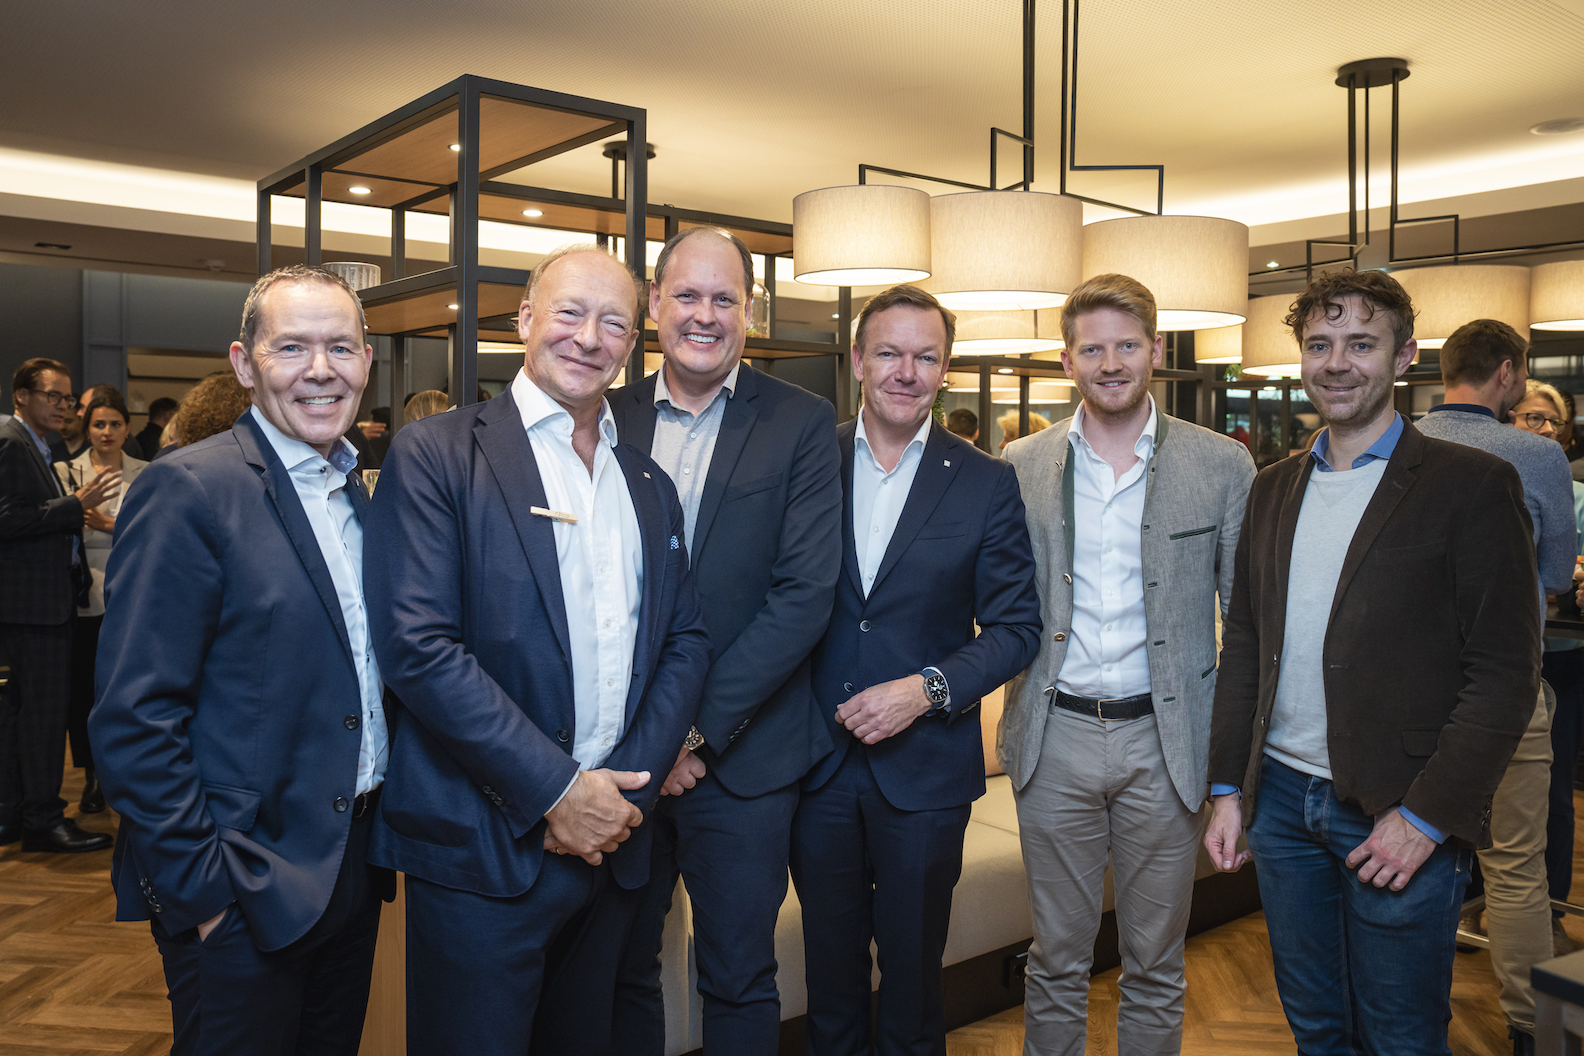 Opening-Party des Hotels „Residence Inn Munich Central” in München